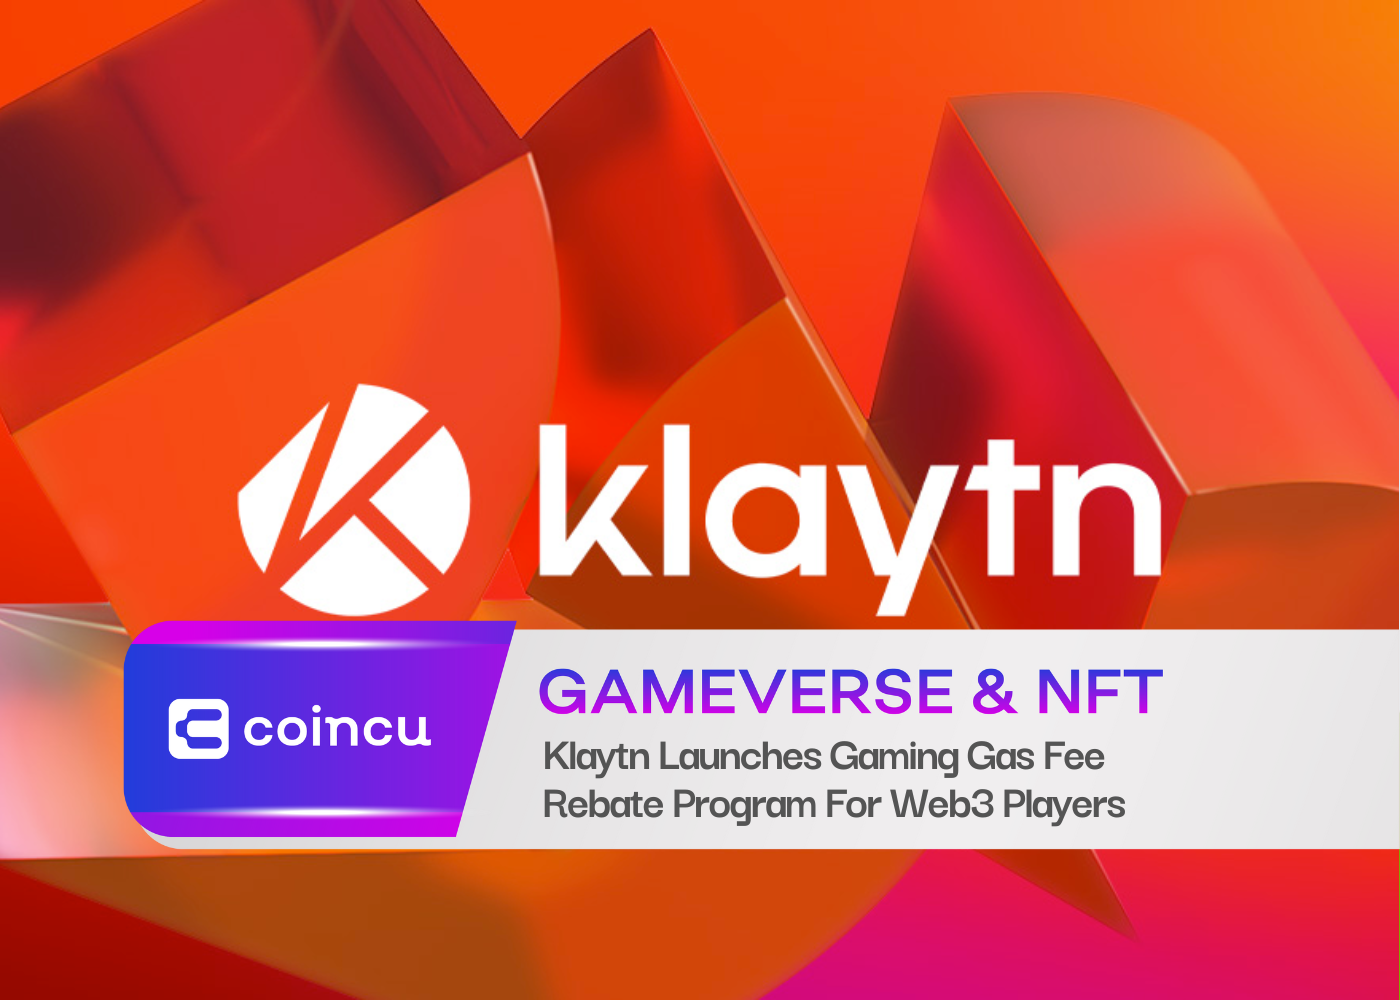 Klaytn Launches Gaming Gas Fee Rebate Program For Web3 Players